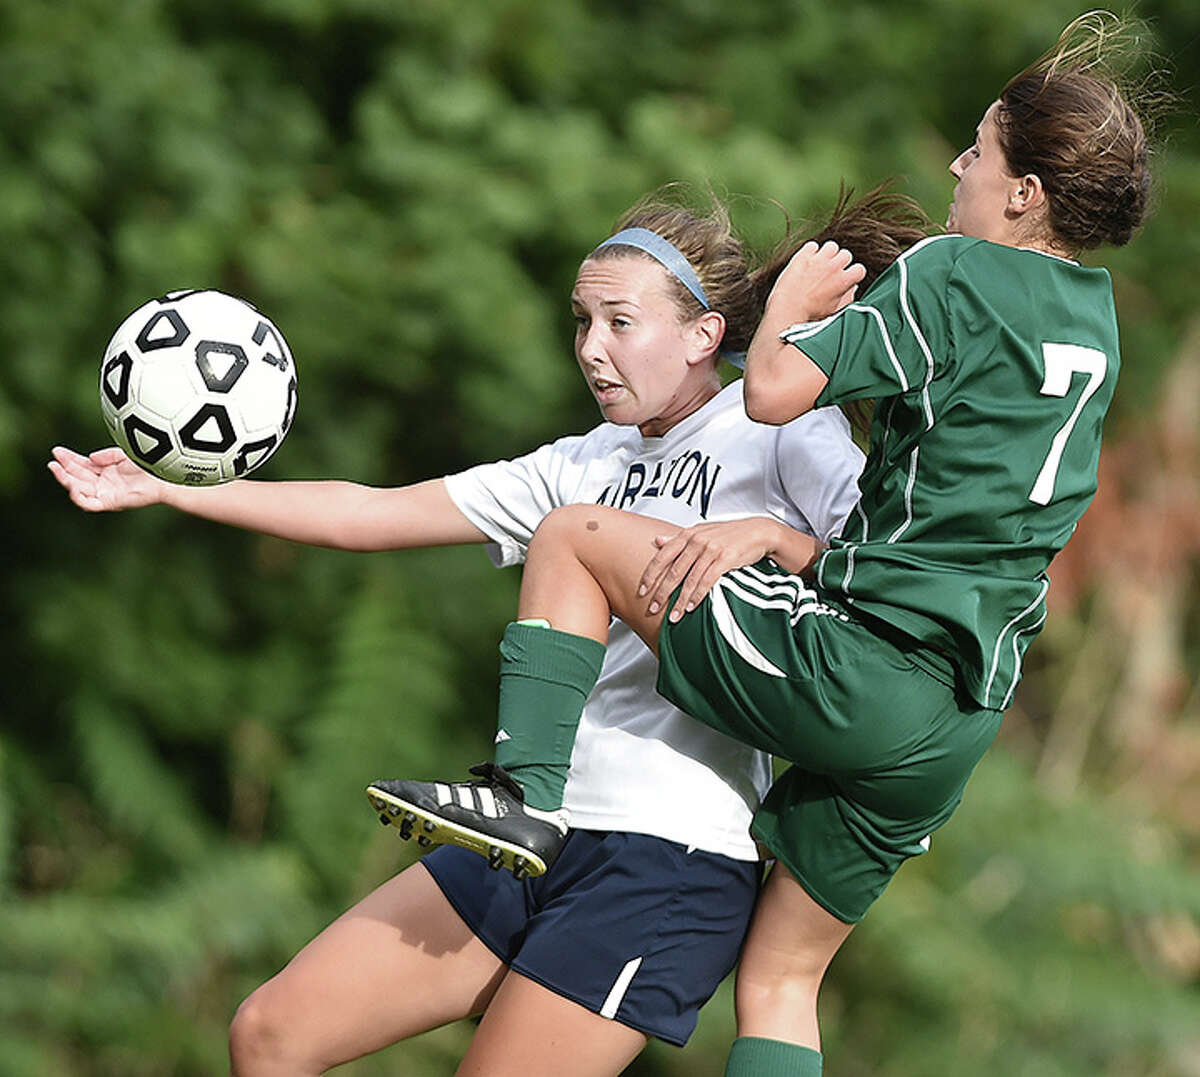 Lauralton Hall senior captain Suzanne Lema battles Guilford junior midfielder Emma Rusconi during the second half of their first game in the SCC in Milford Tuesday afternoon. The Lauralton Hall Crusaders defeated the Guilford Indians, 1-0. (Catherine Avalone – New Haven Register)